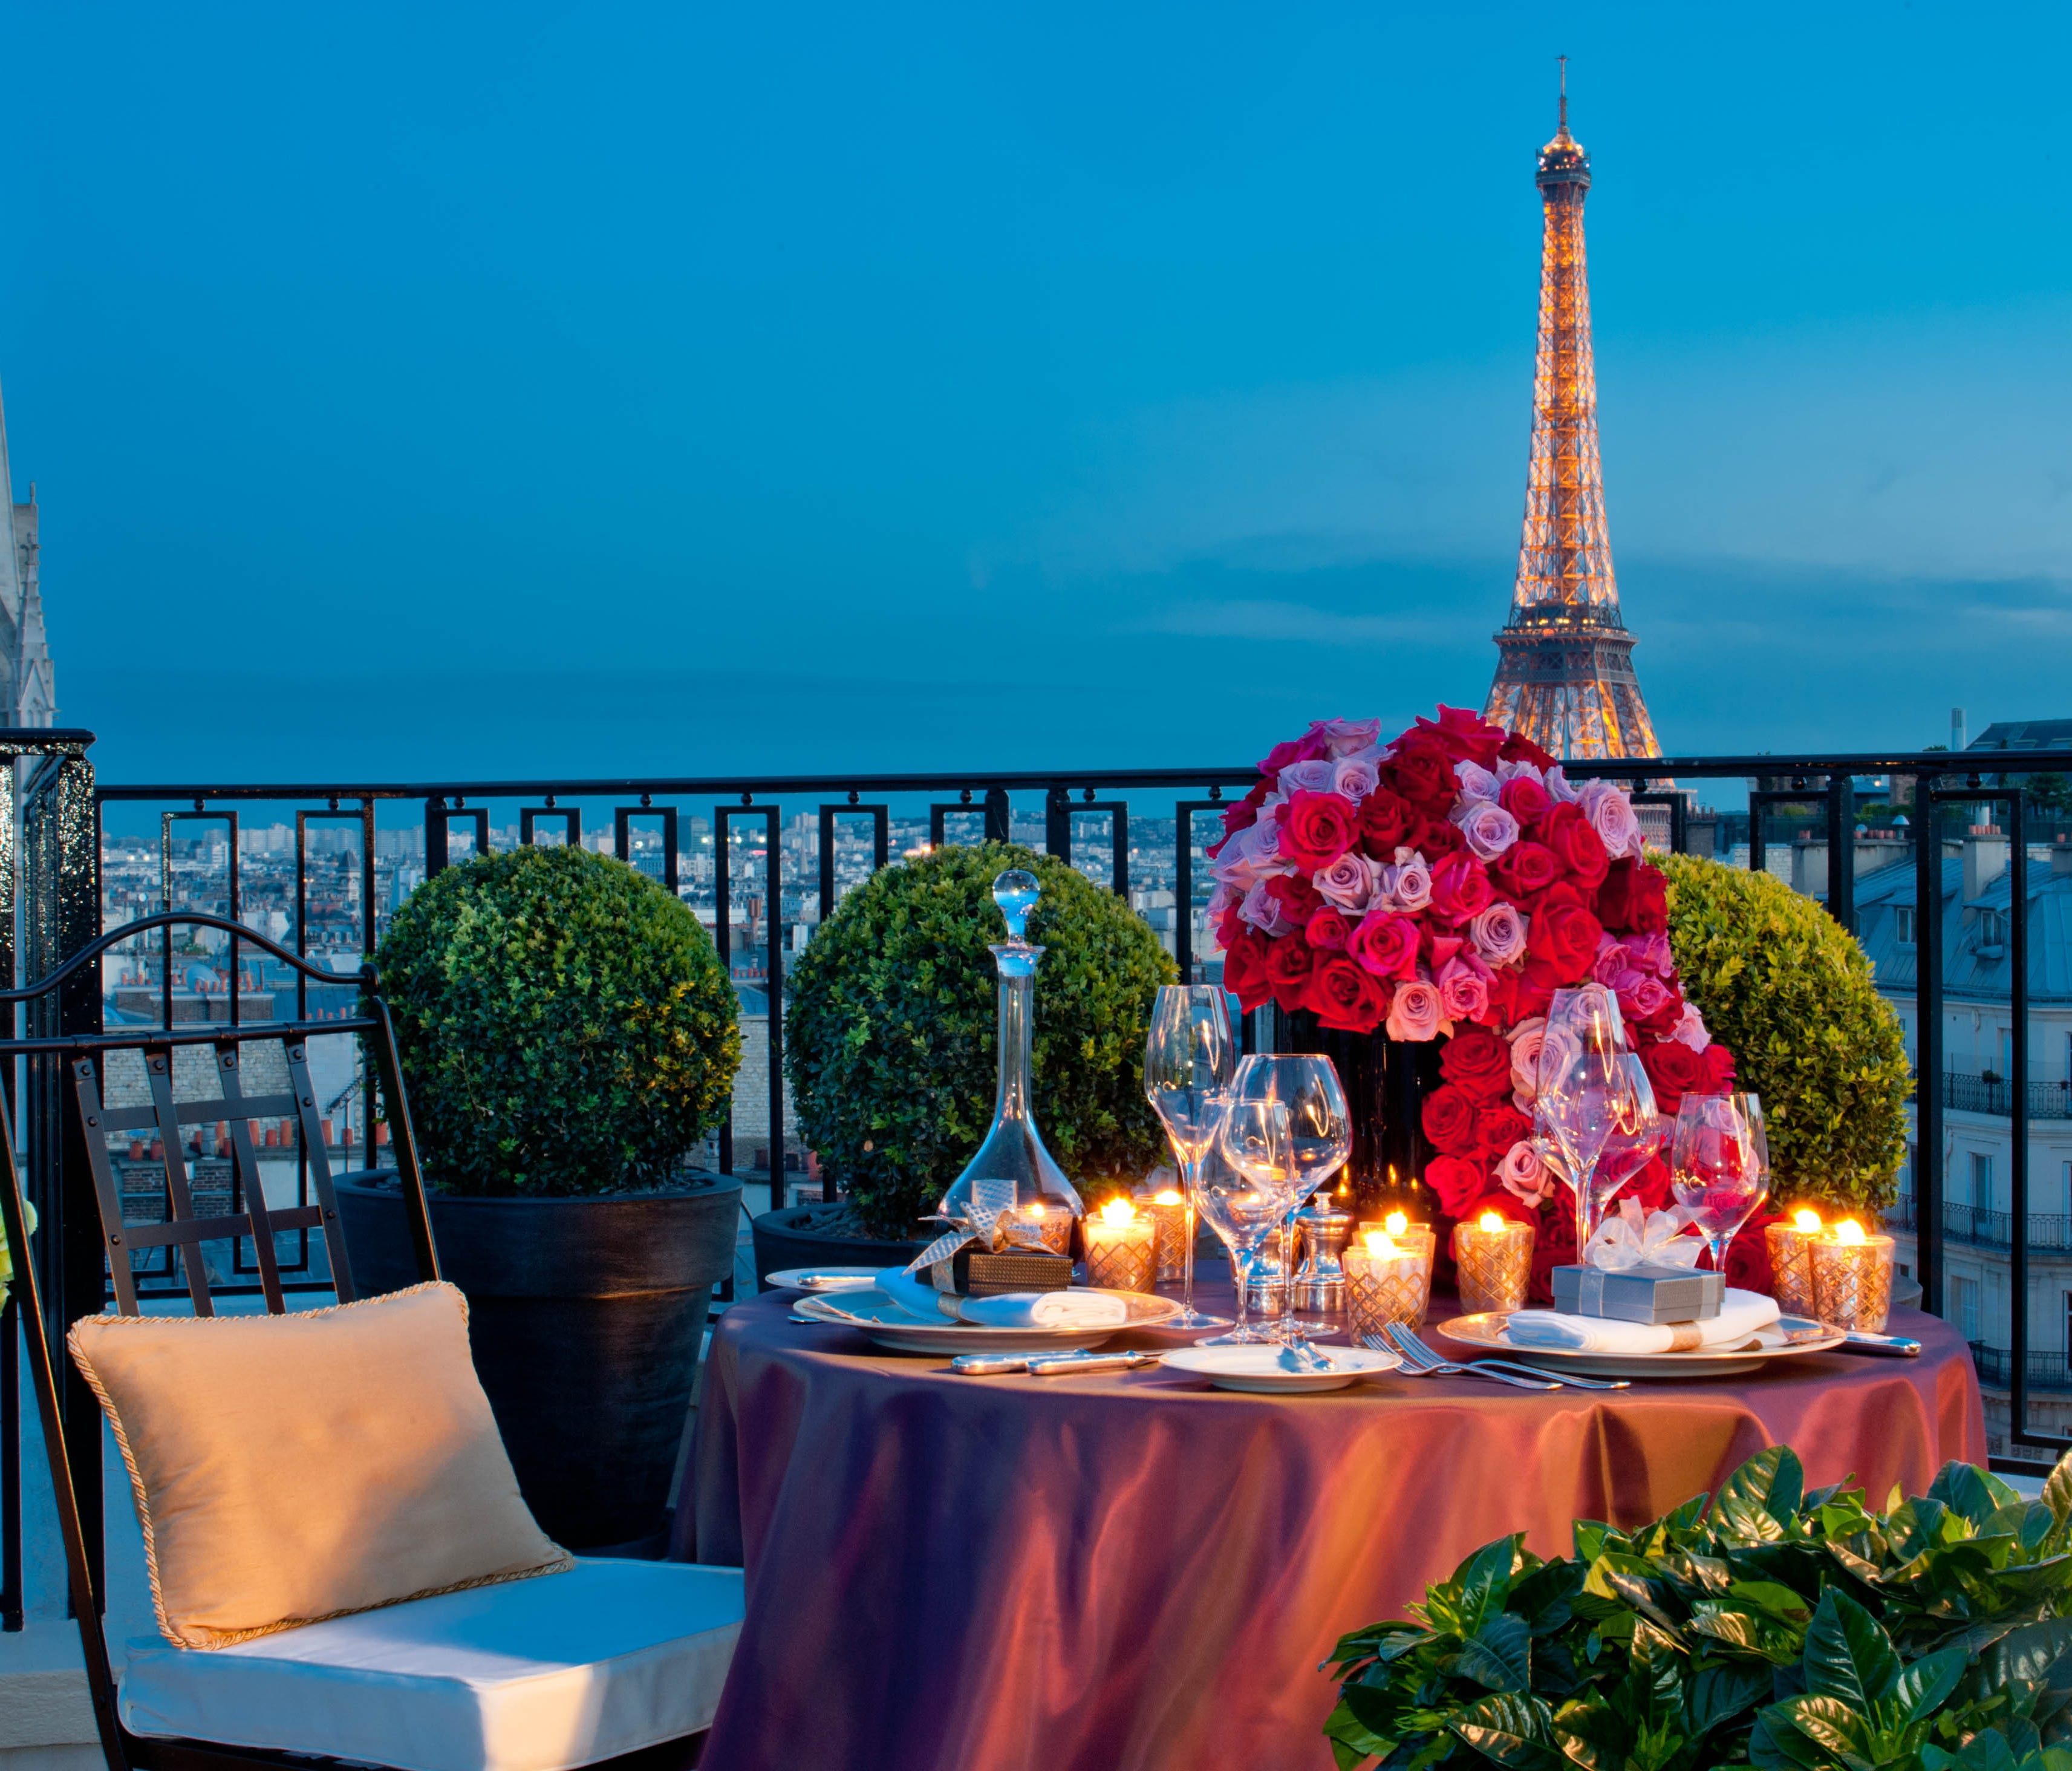 The Four Seasons Hotel George V Paris is the 16th best reviewed hotel in the city, according to Booking.com.